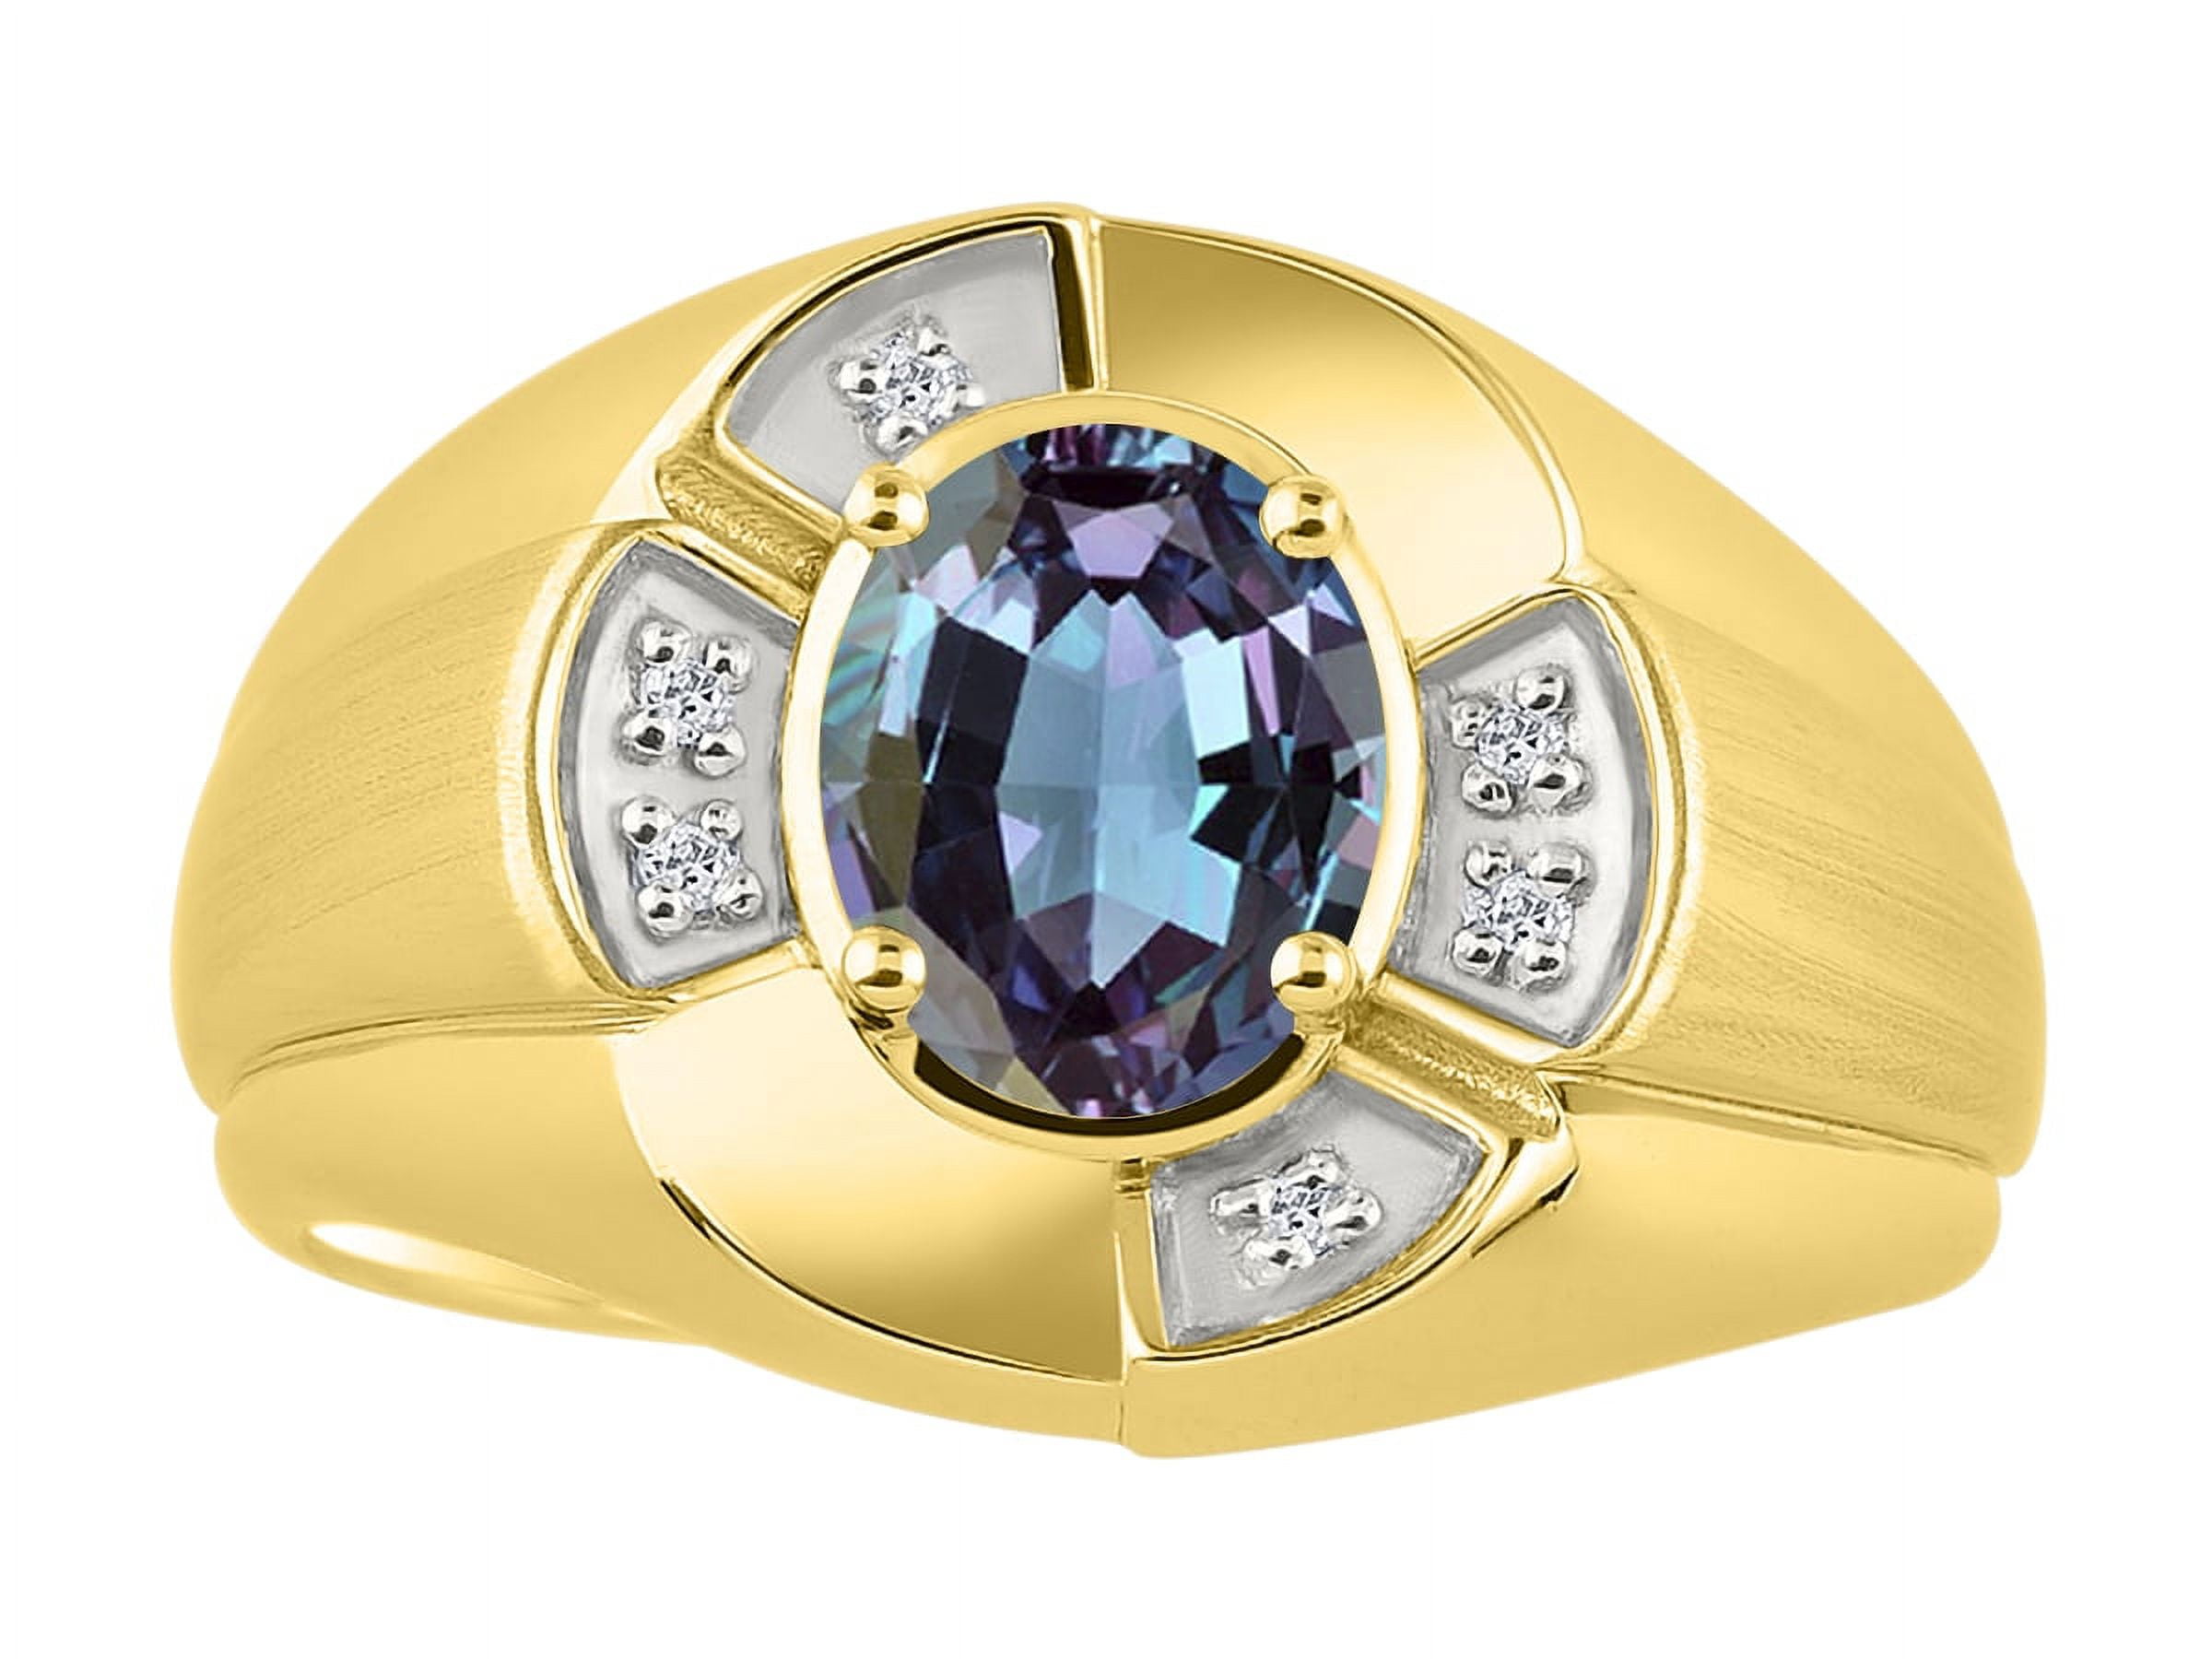 Rylos Mens Rings Yellow Gold Plated Silver Rings Lucky Nugget Horse Head  6X4MM Gemstone & Diamond Ring Alexandrite June Birthstone Rings For Men, Men's  Rings, Silver Rings, Sizes 8-13|Amazon.com